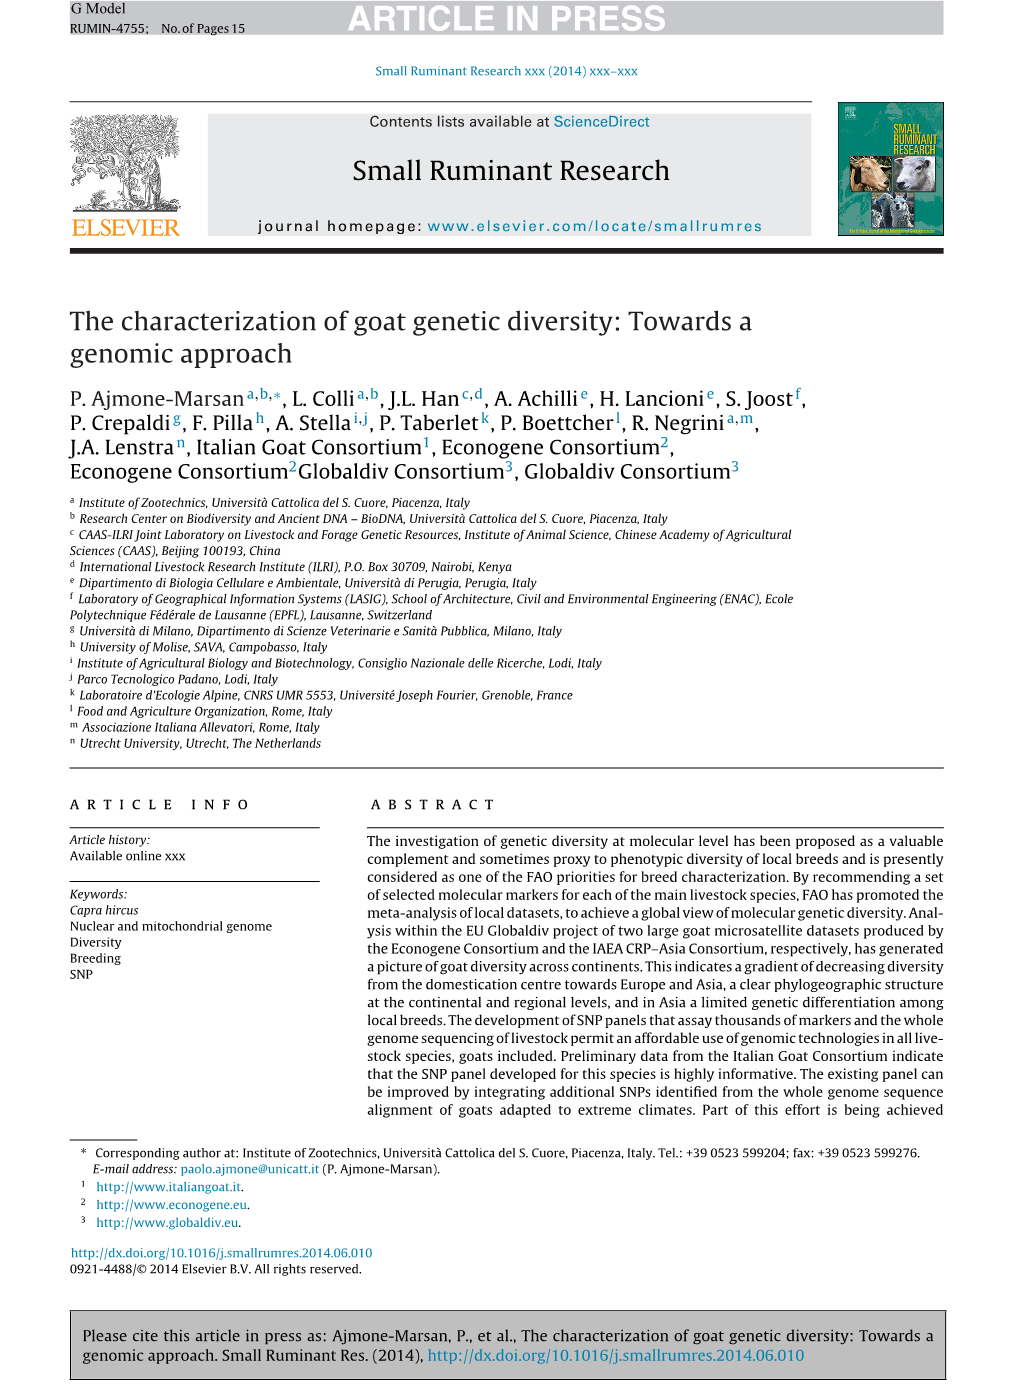 The Characterization of Goat Genetic Diversity: Towards A